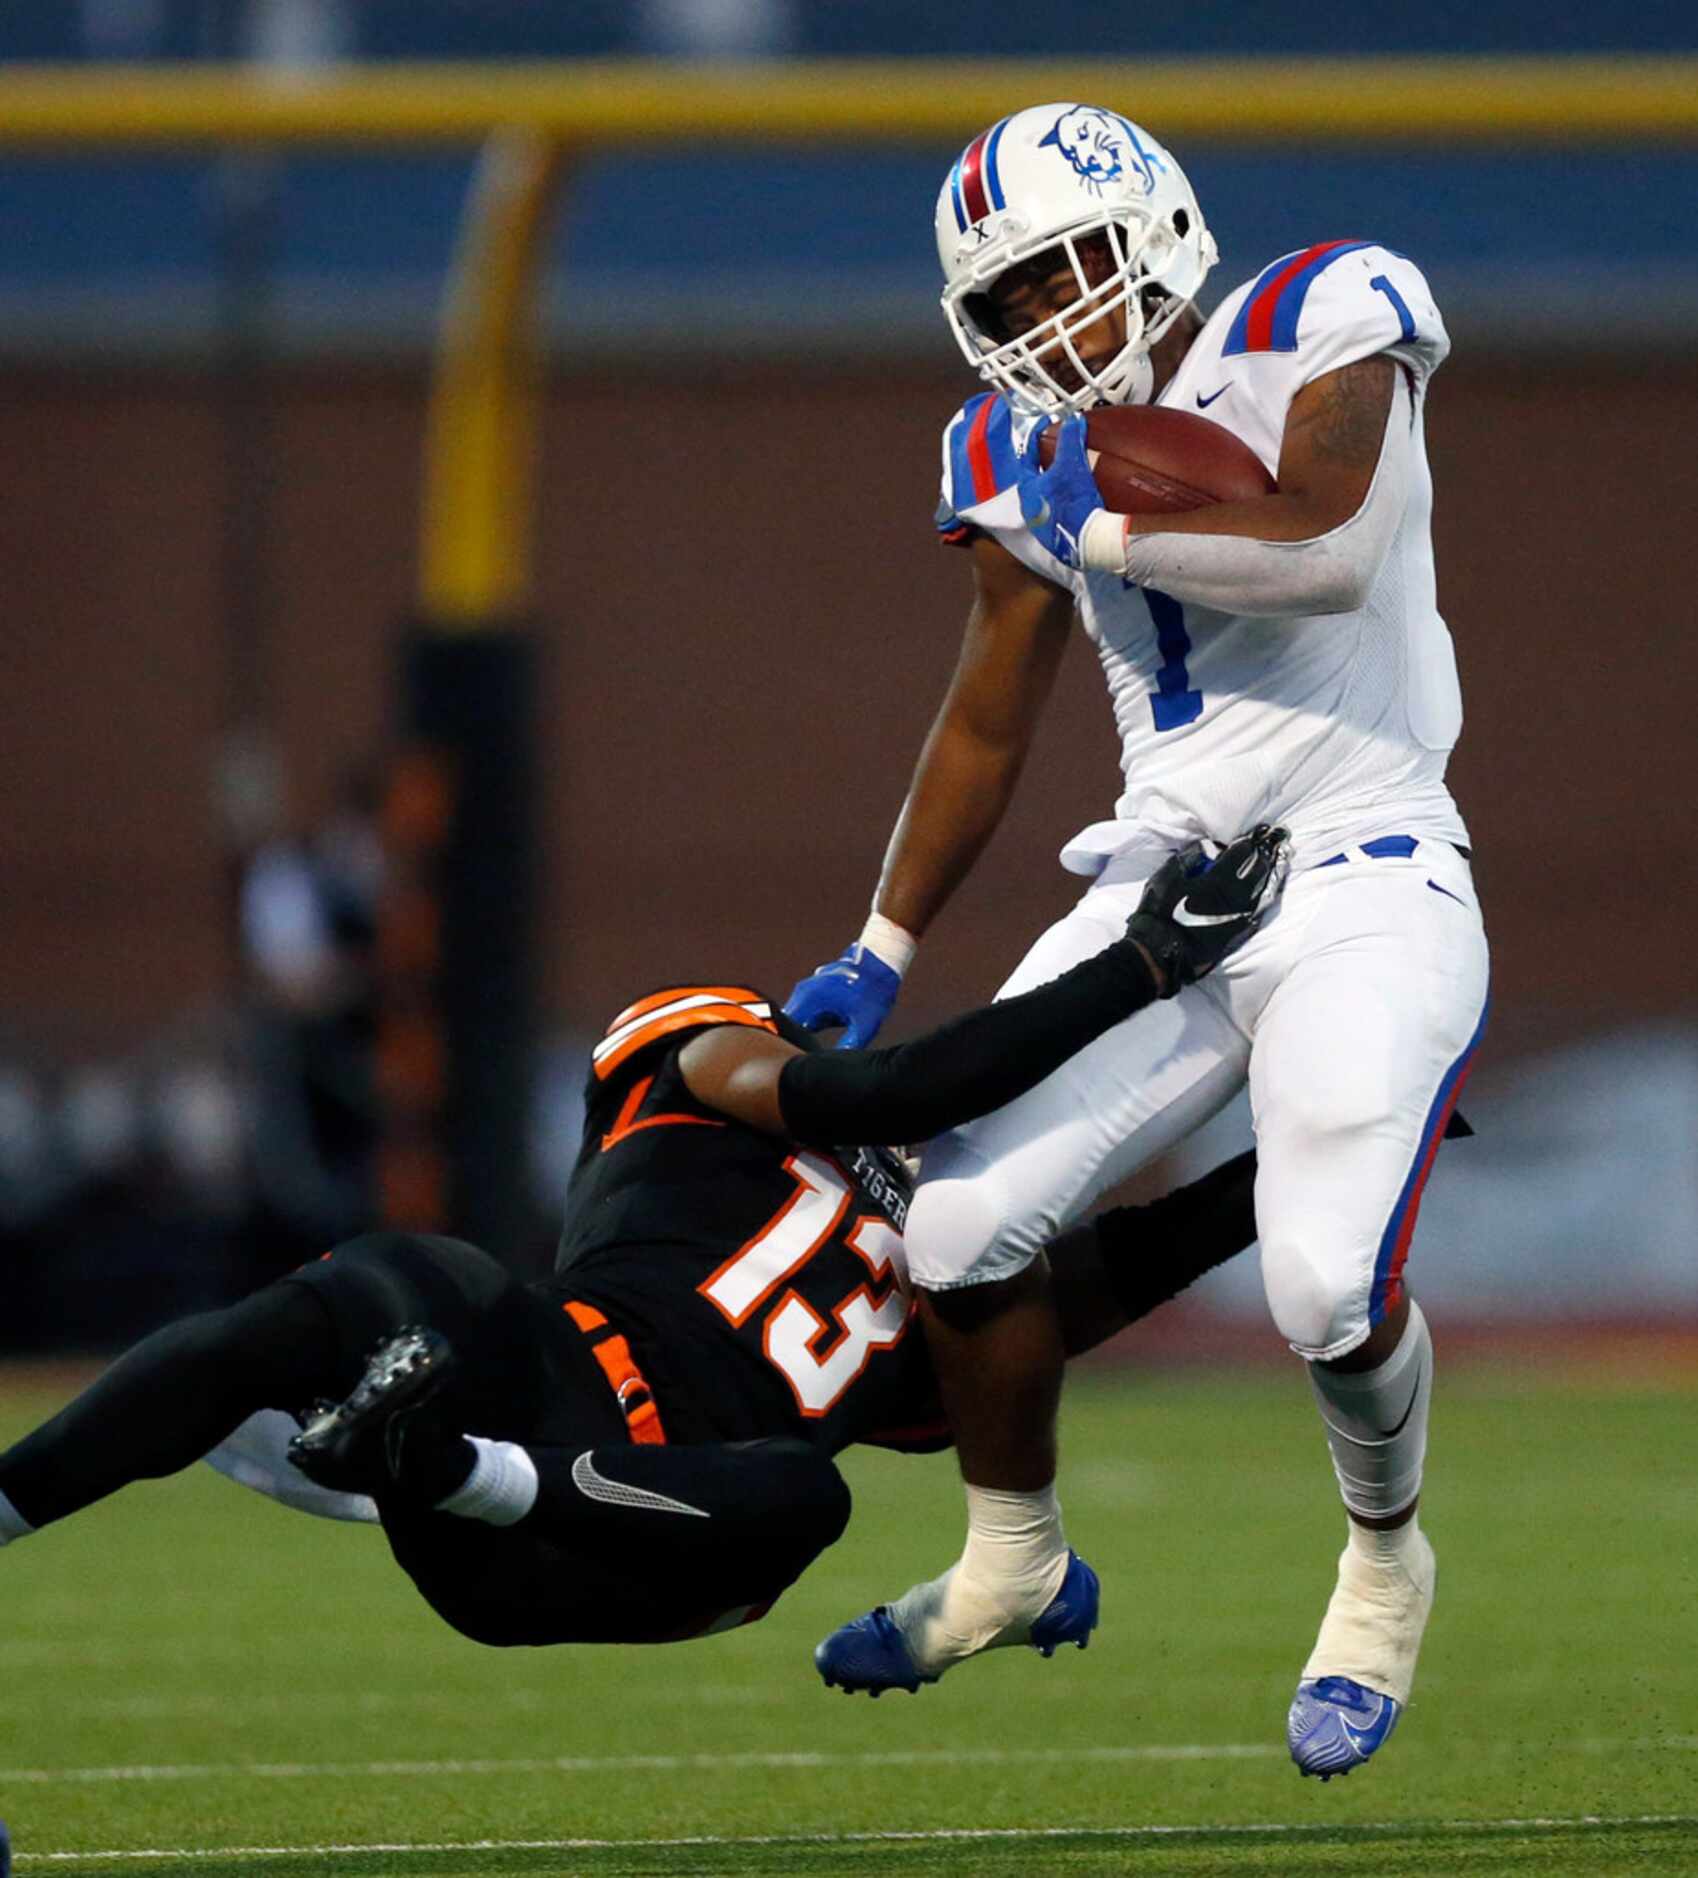 Duncanville running back Trysten Smith (1) is tackled by Lancaster defensive back Theron...